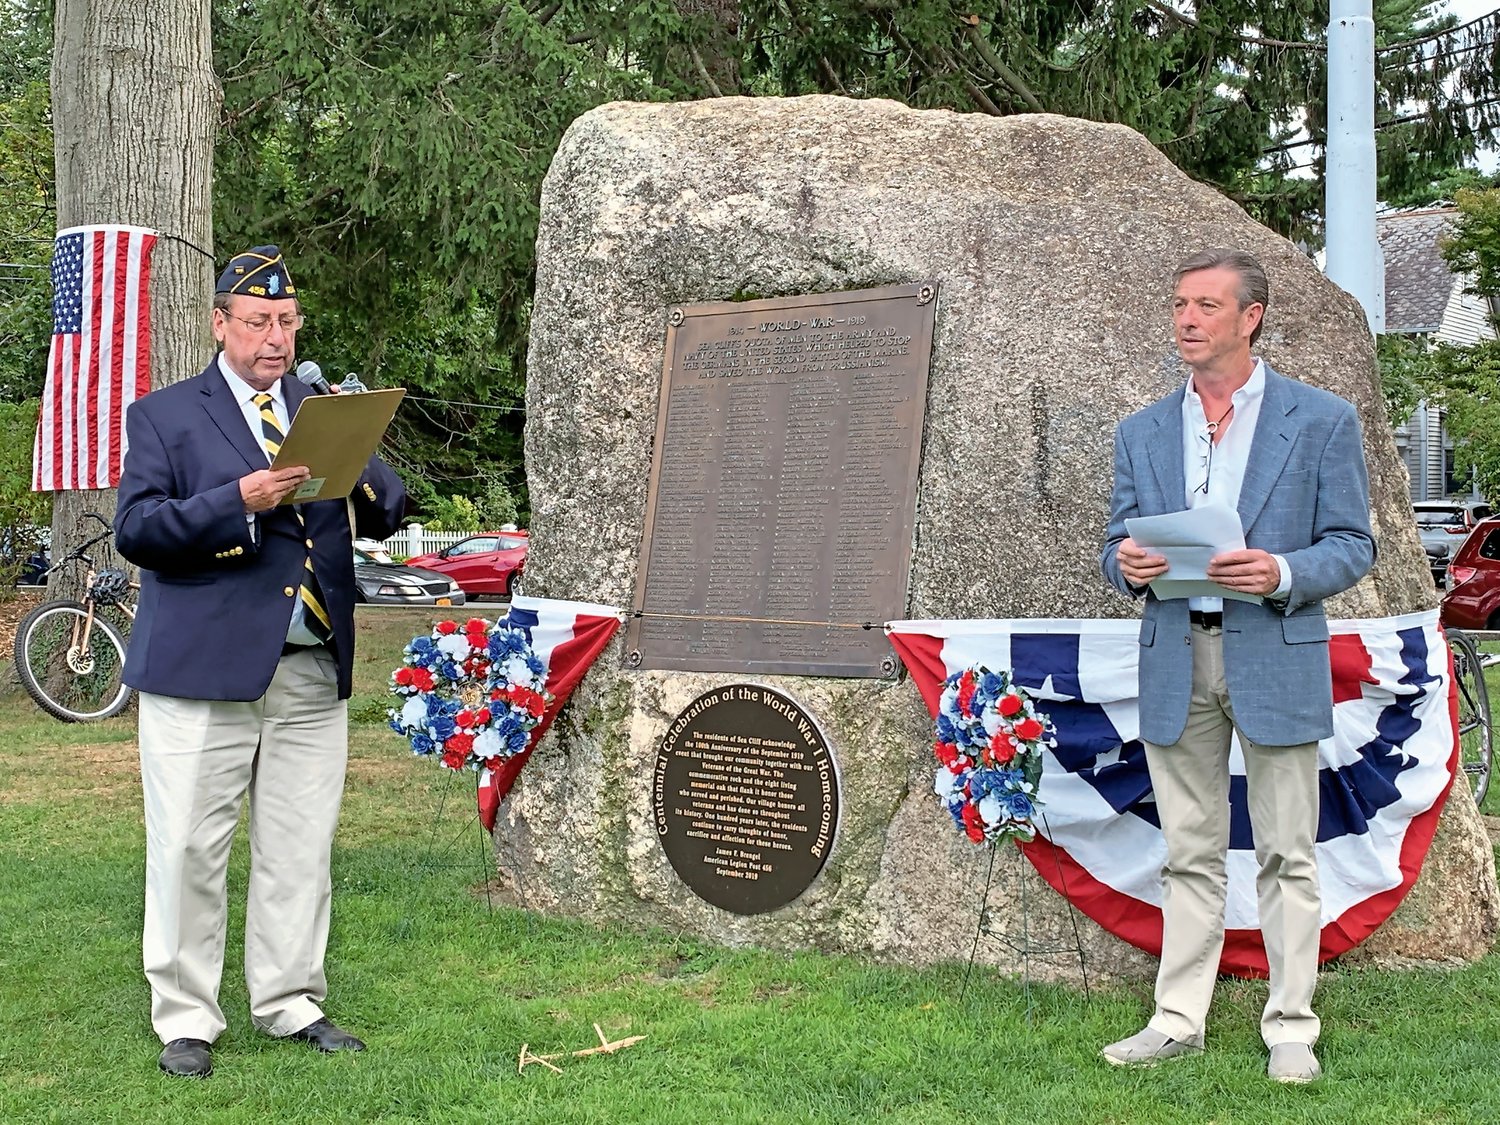 Parade Grand Marshal Ted Kopczynski, left, and Sea Cliff Village Administrator Bruce Kennedy paid tribute to veterans of World War I.